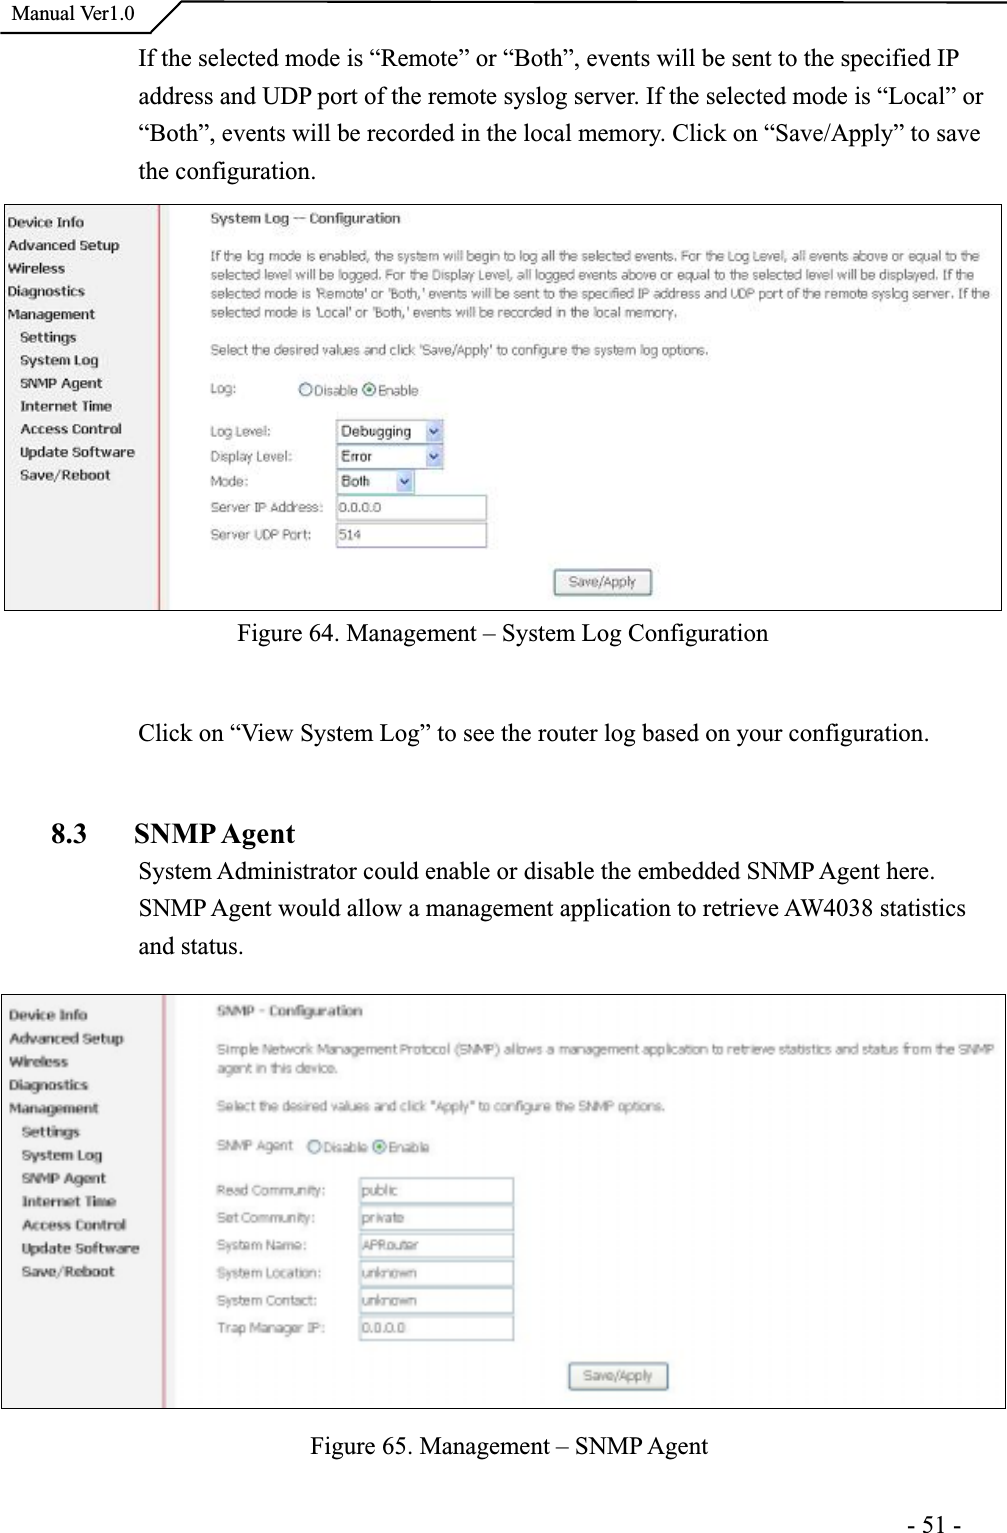  Manual Ver1.0If the selected mode is “Remote” or “Both”, events will be sent to the specified IPaddress and UDP port of the remote syslog server. If the selected mode is “Local” or “Both”, events will be recorded in the local memory. Click on “Save/Apply” to savethe configuration. Figure 64. Management – System Log Configuration Click on “View System Log” to see the router log based on your configuration. 8.3 SNMP AgentSystem Administrator could enable or disable the embedded SNMP Agent here. SNMP Agent would allow a management application to retrieve AW4038 statistics and status. Figure 65. Management – SNMP Agent                                                                     -51-